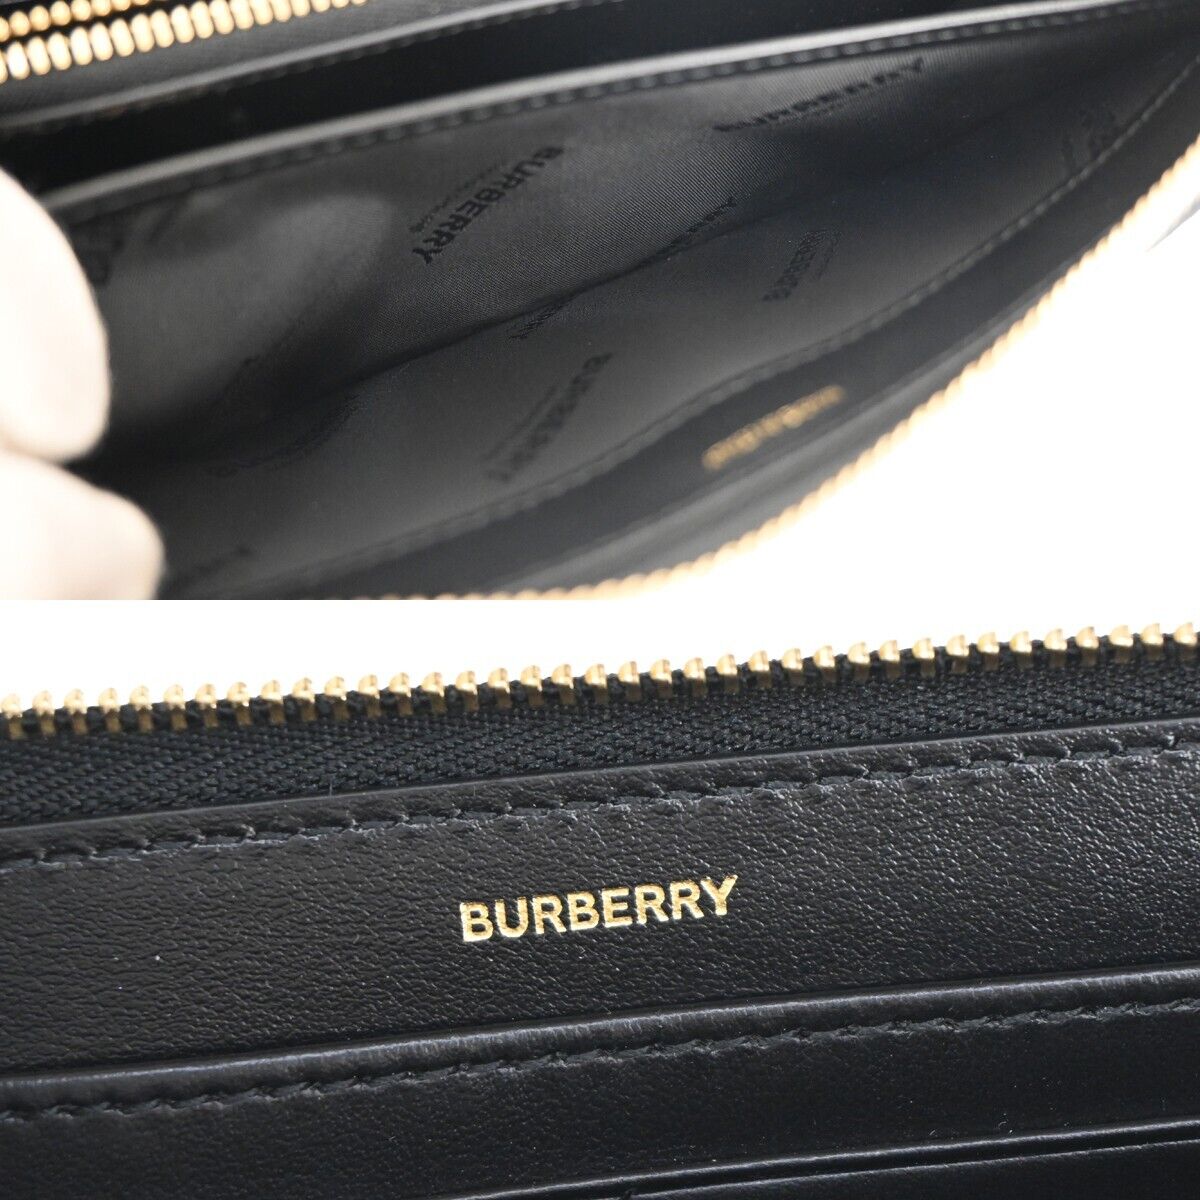 Burberry Women's Sophisticated Leather Wallet with Timeless Elegance in Black